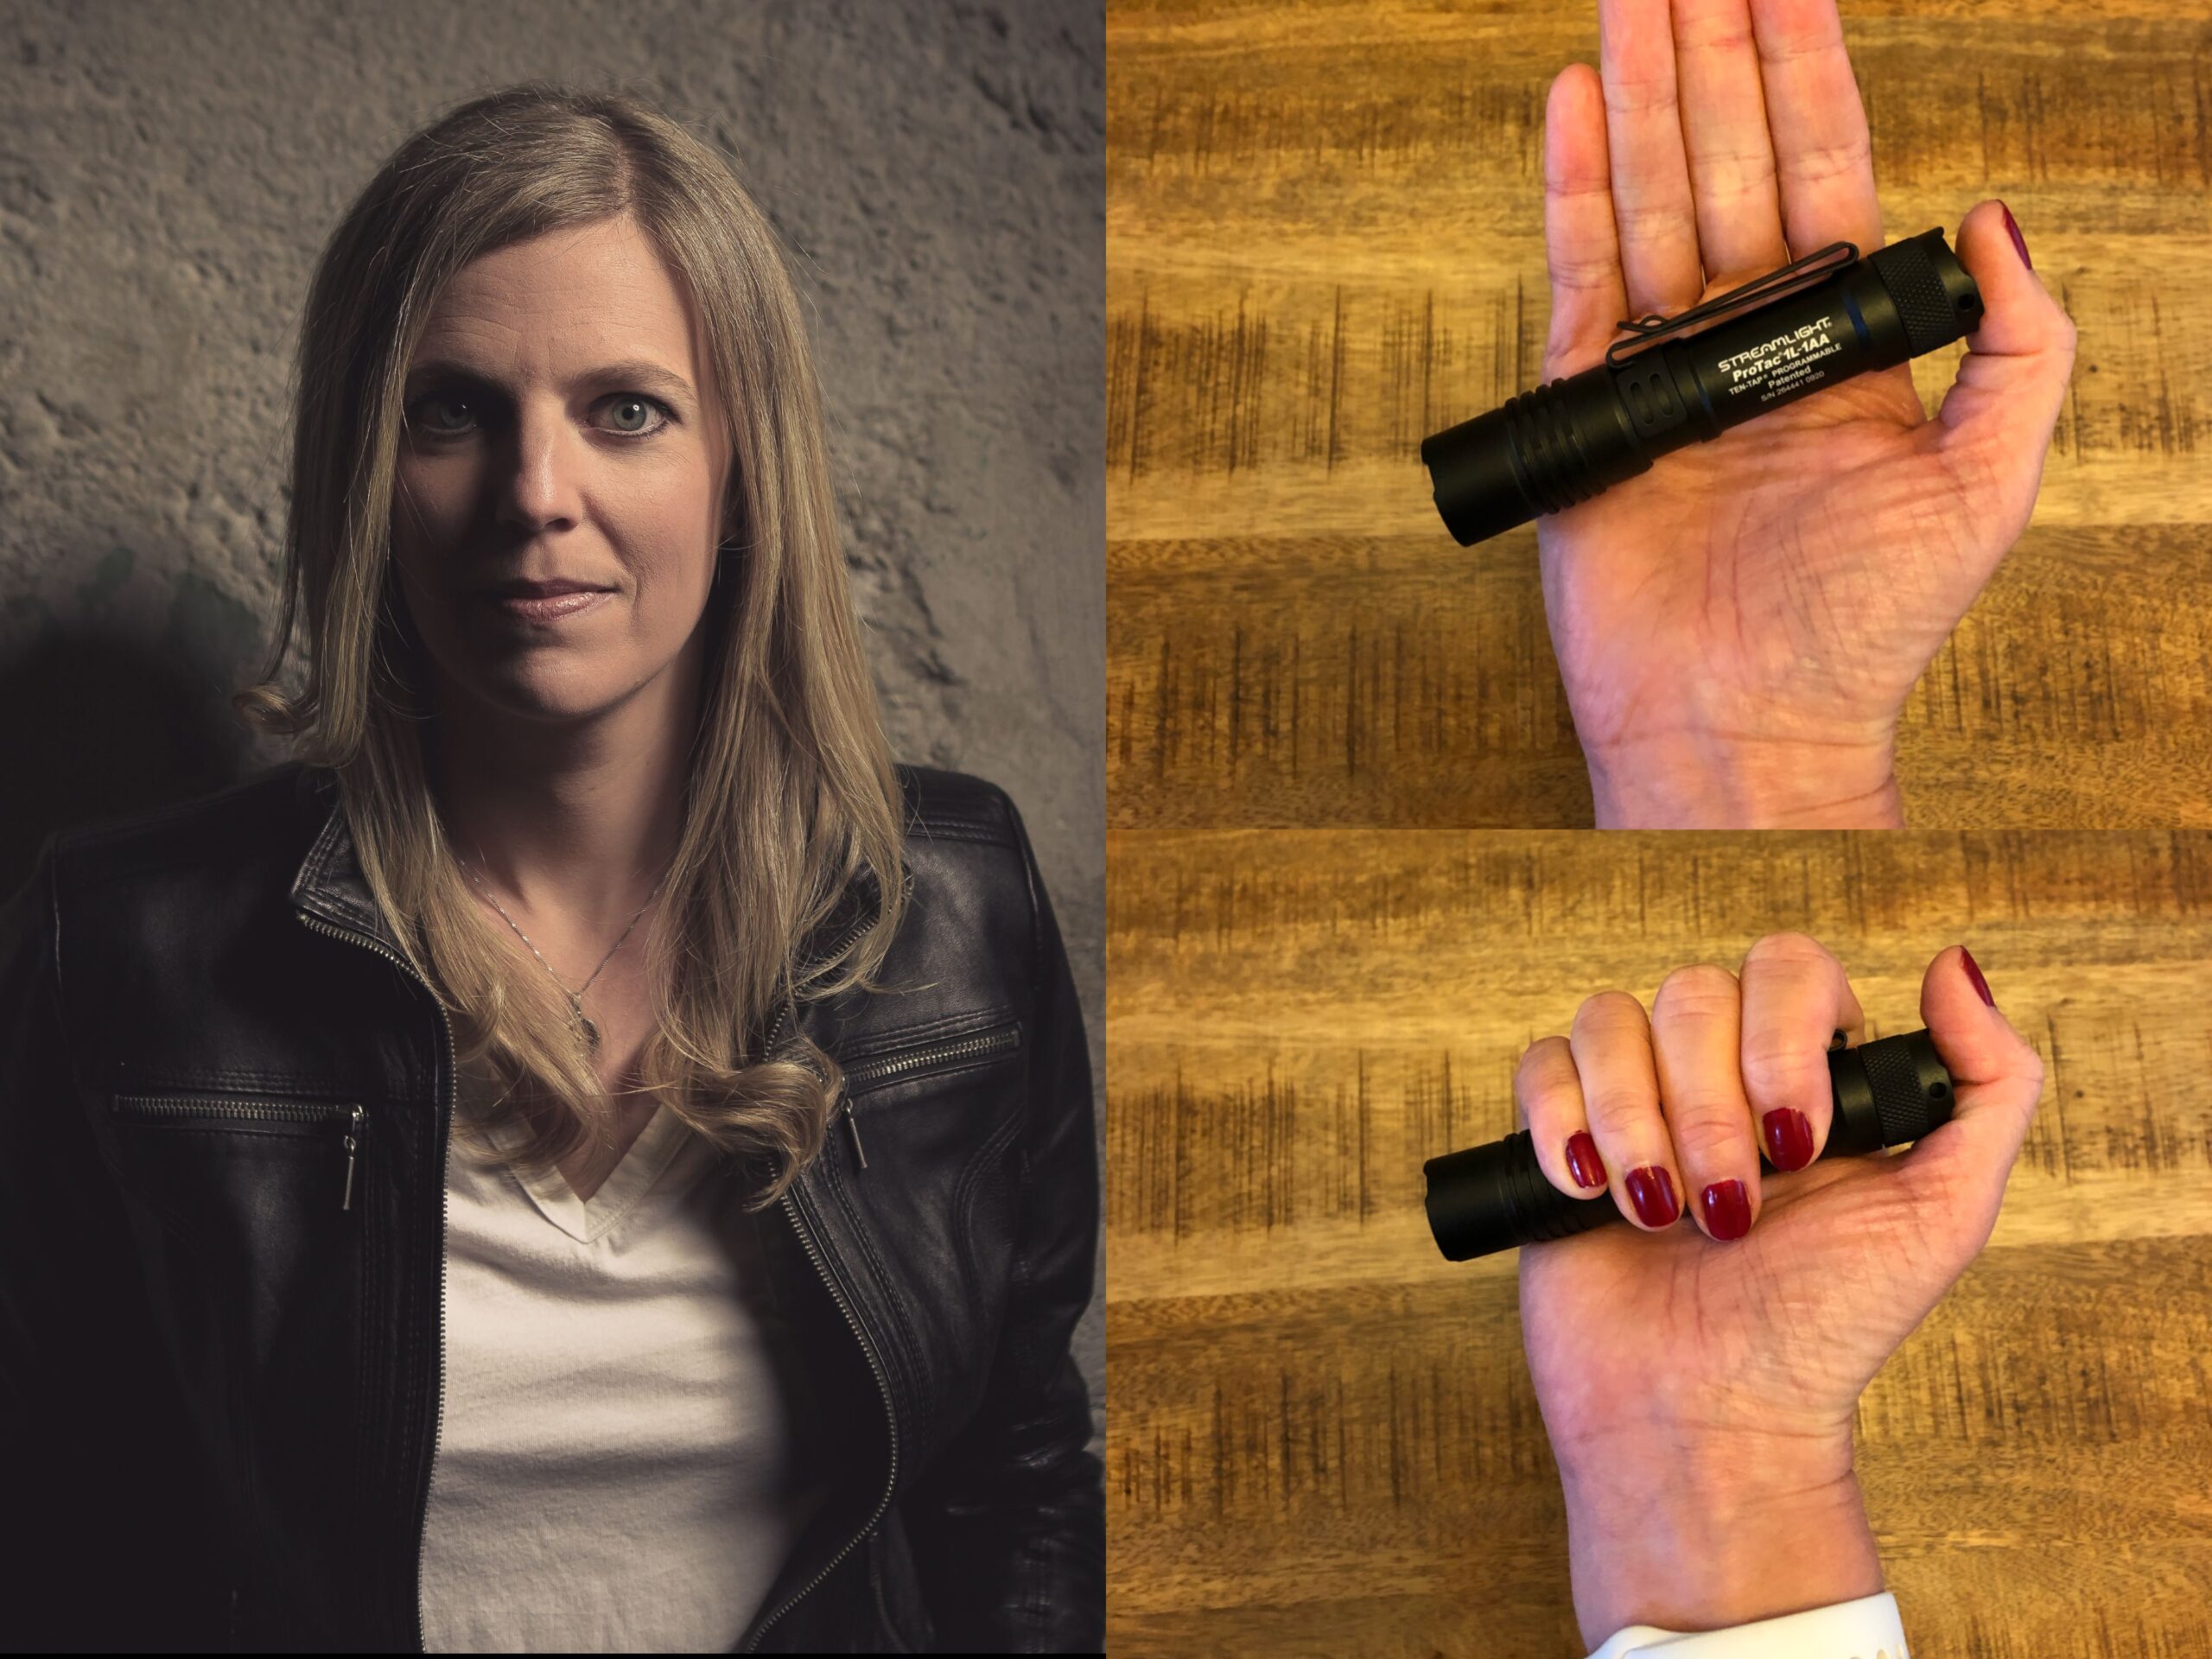 Our Resident Femme Fatale Reviews The Streamlight ProTac 1L-1AA